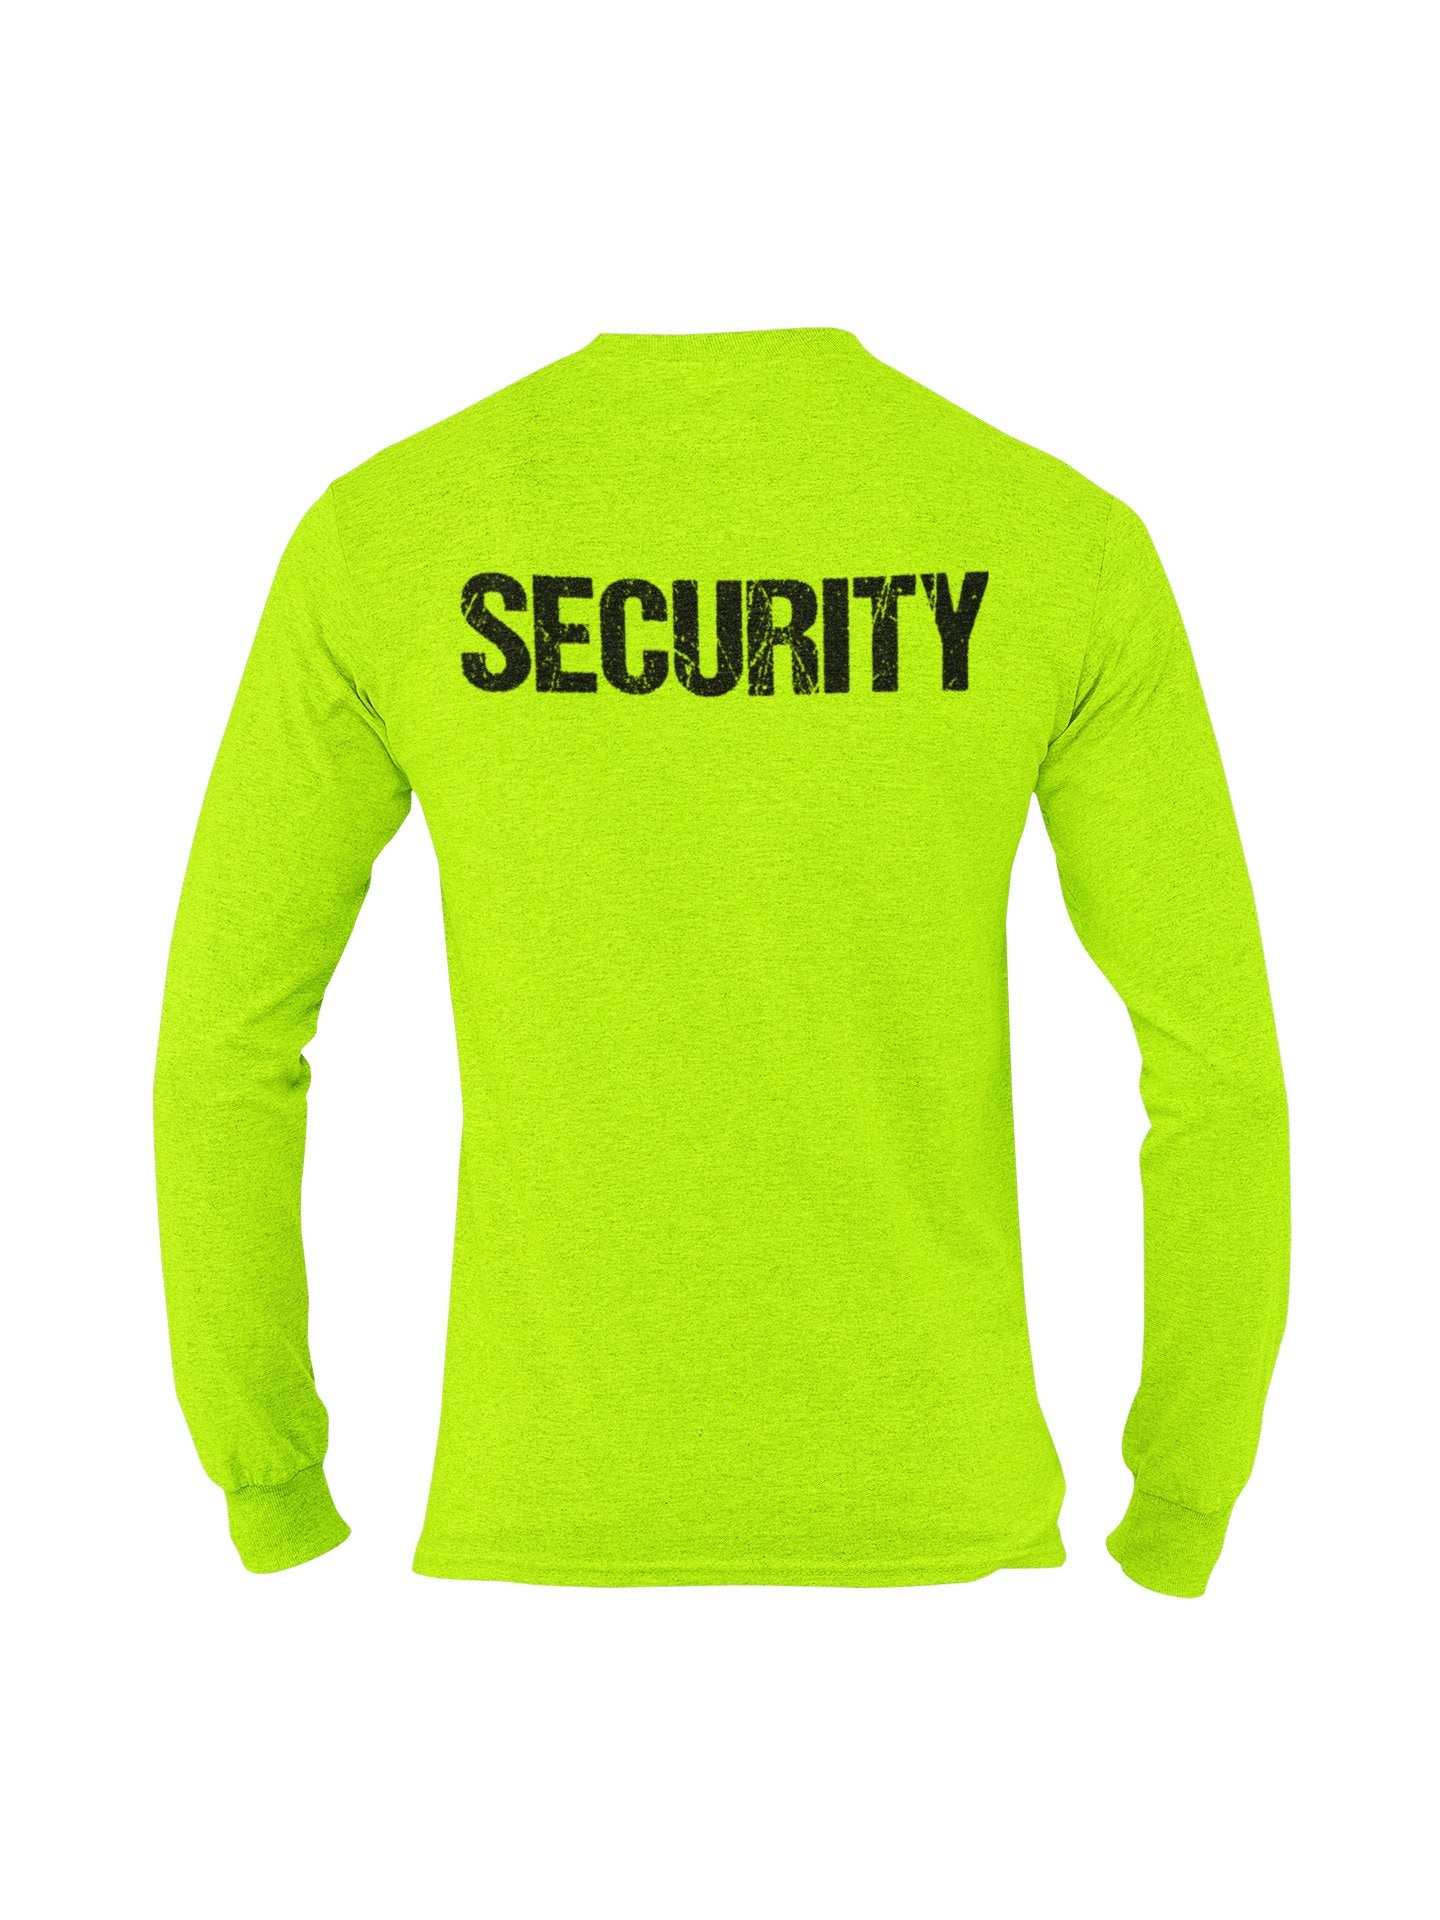 Security Long Sleeve Men's T-Shirt (Distressed Design, Safety Green)